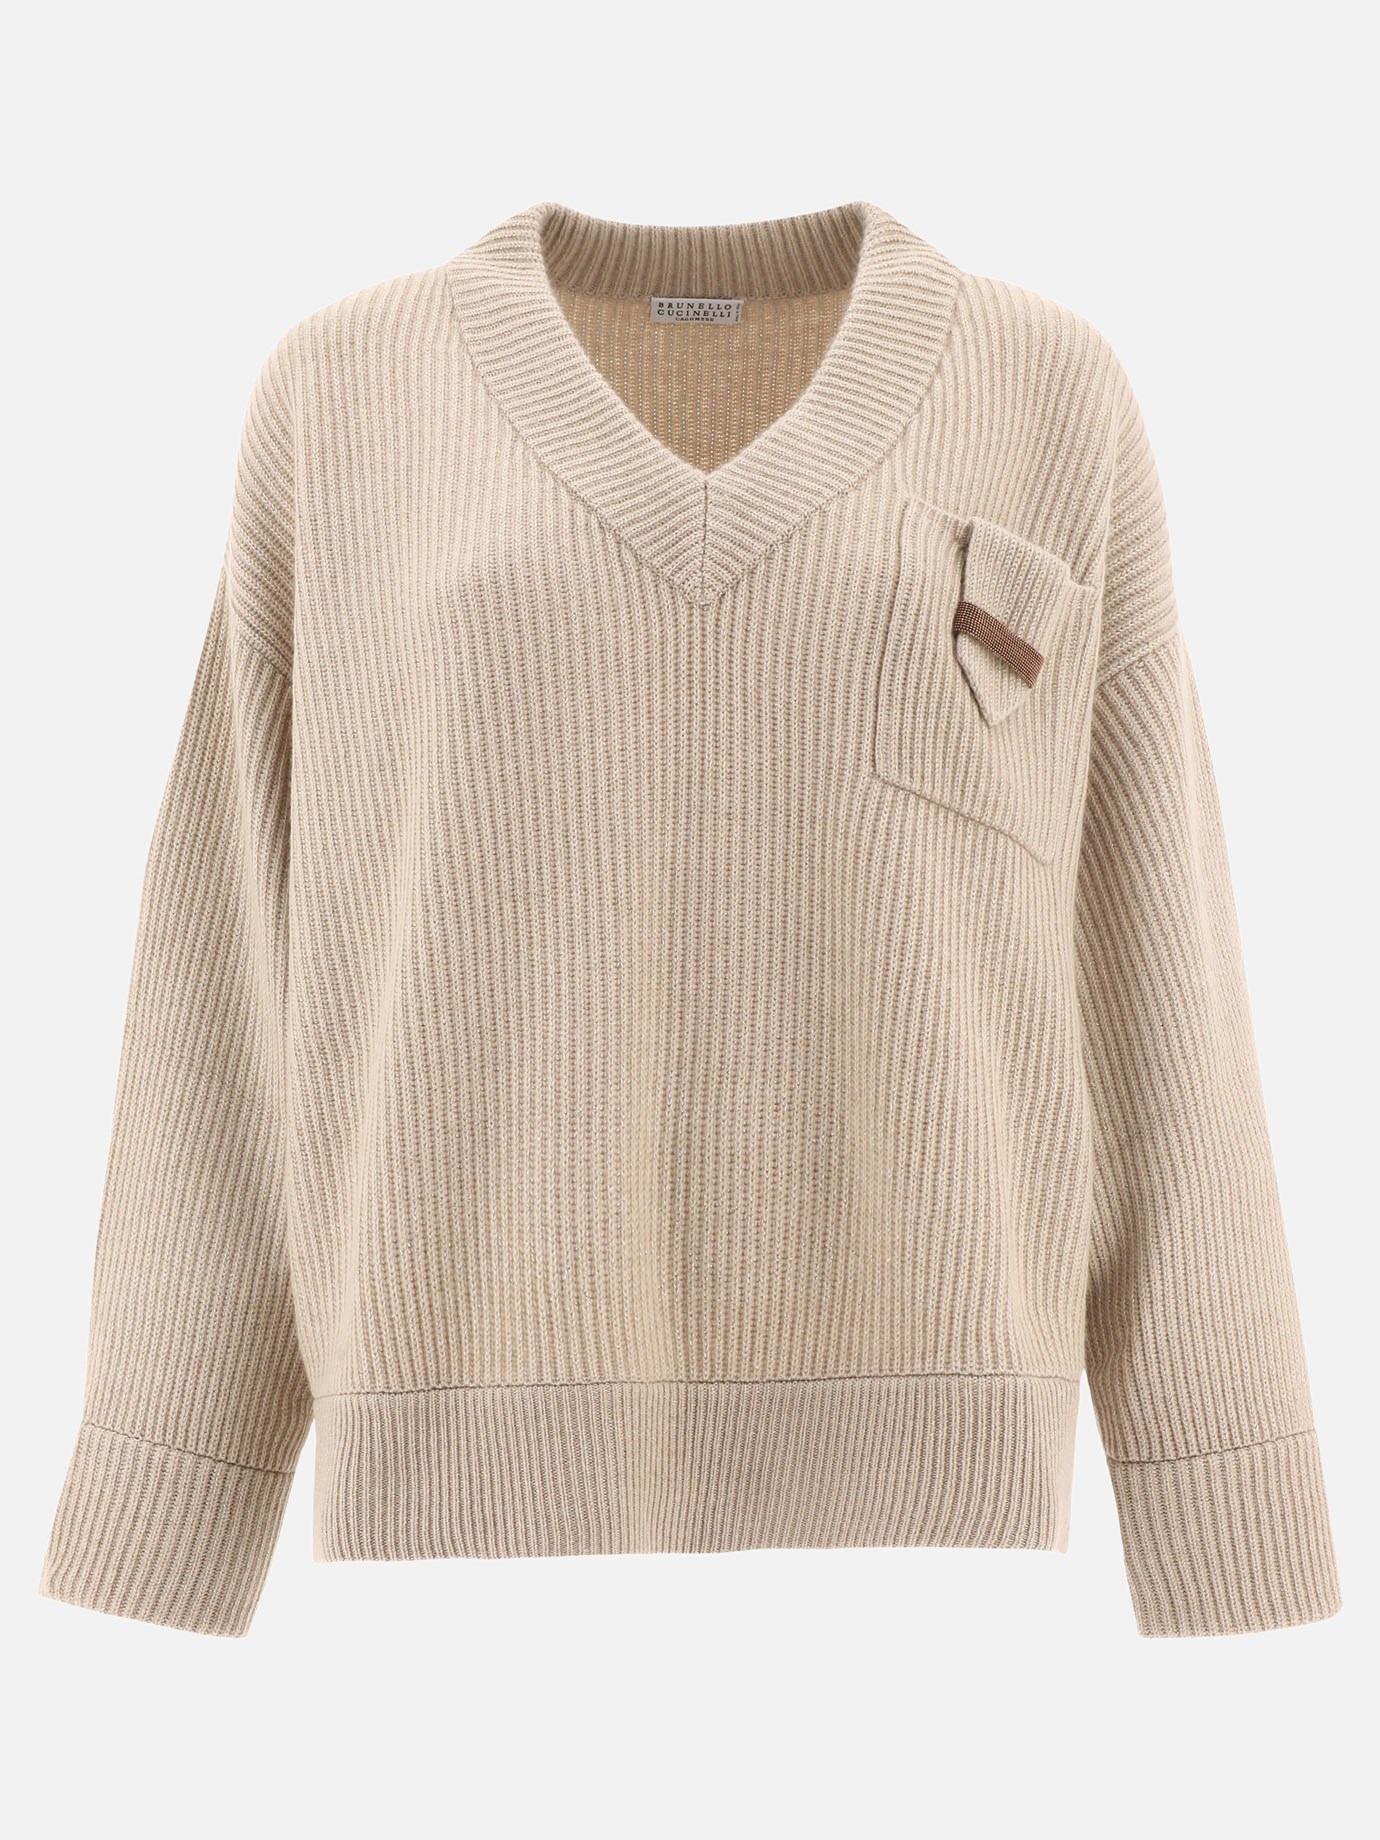 Ribbed sweater with pocketby Brunello Cucinelli - 4